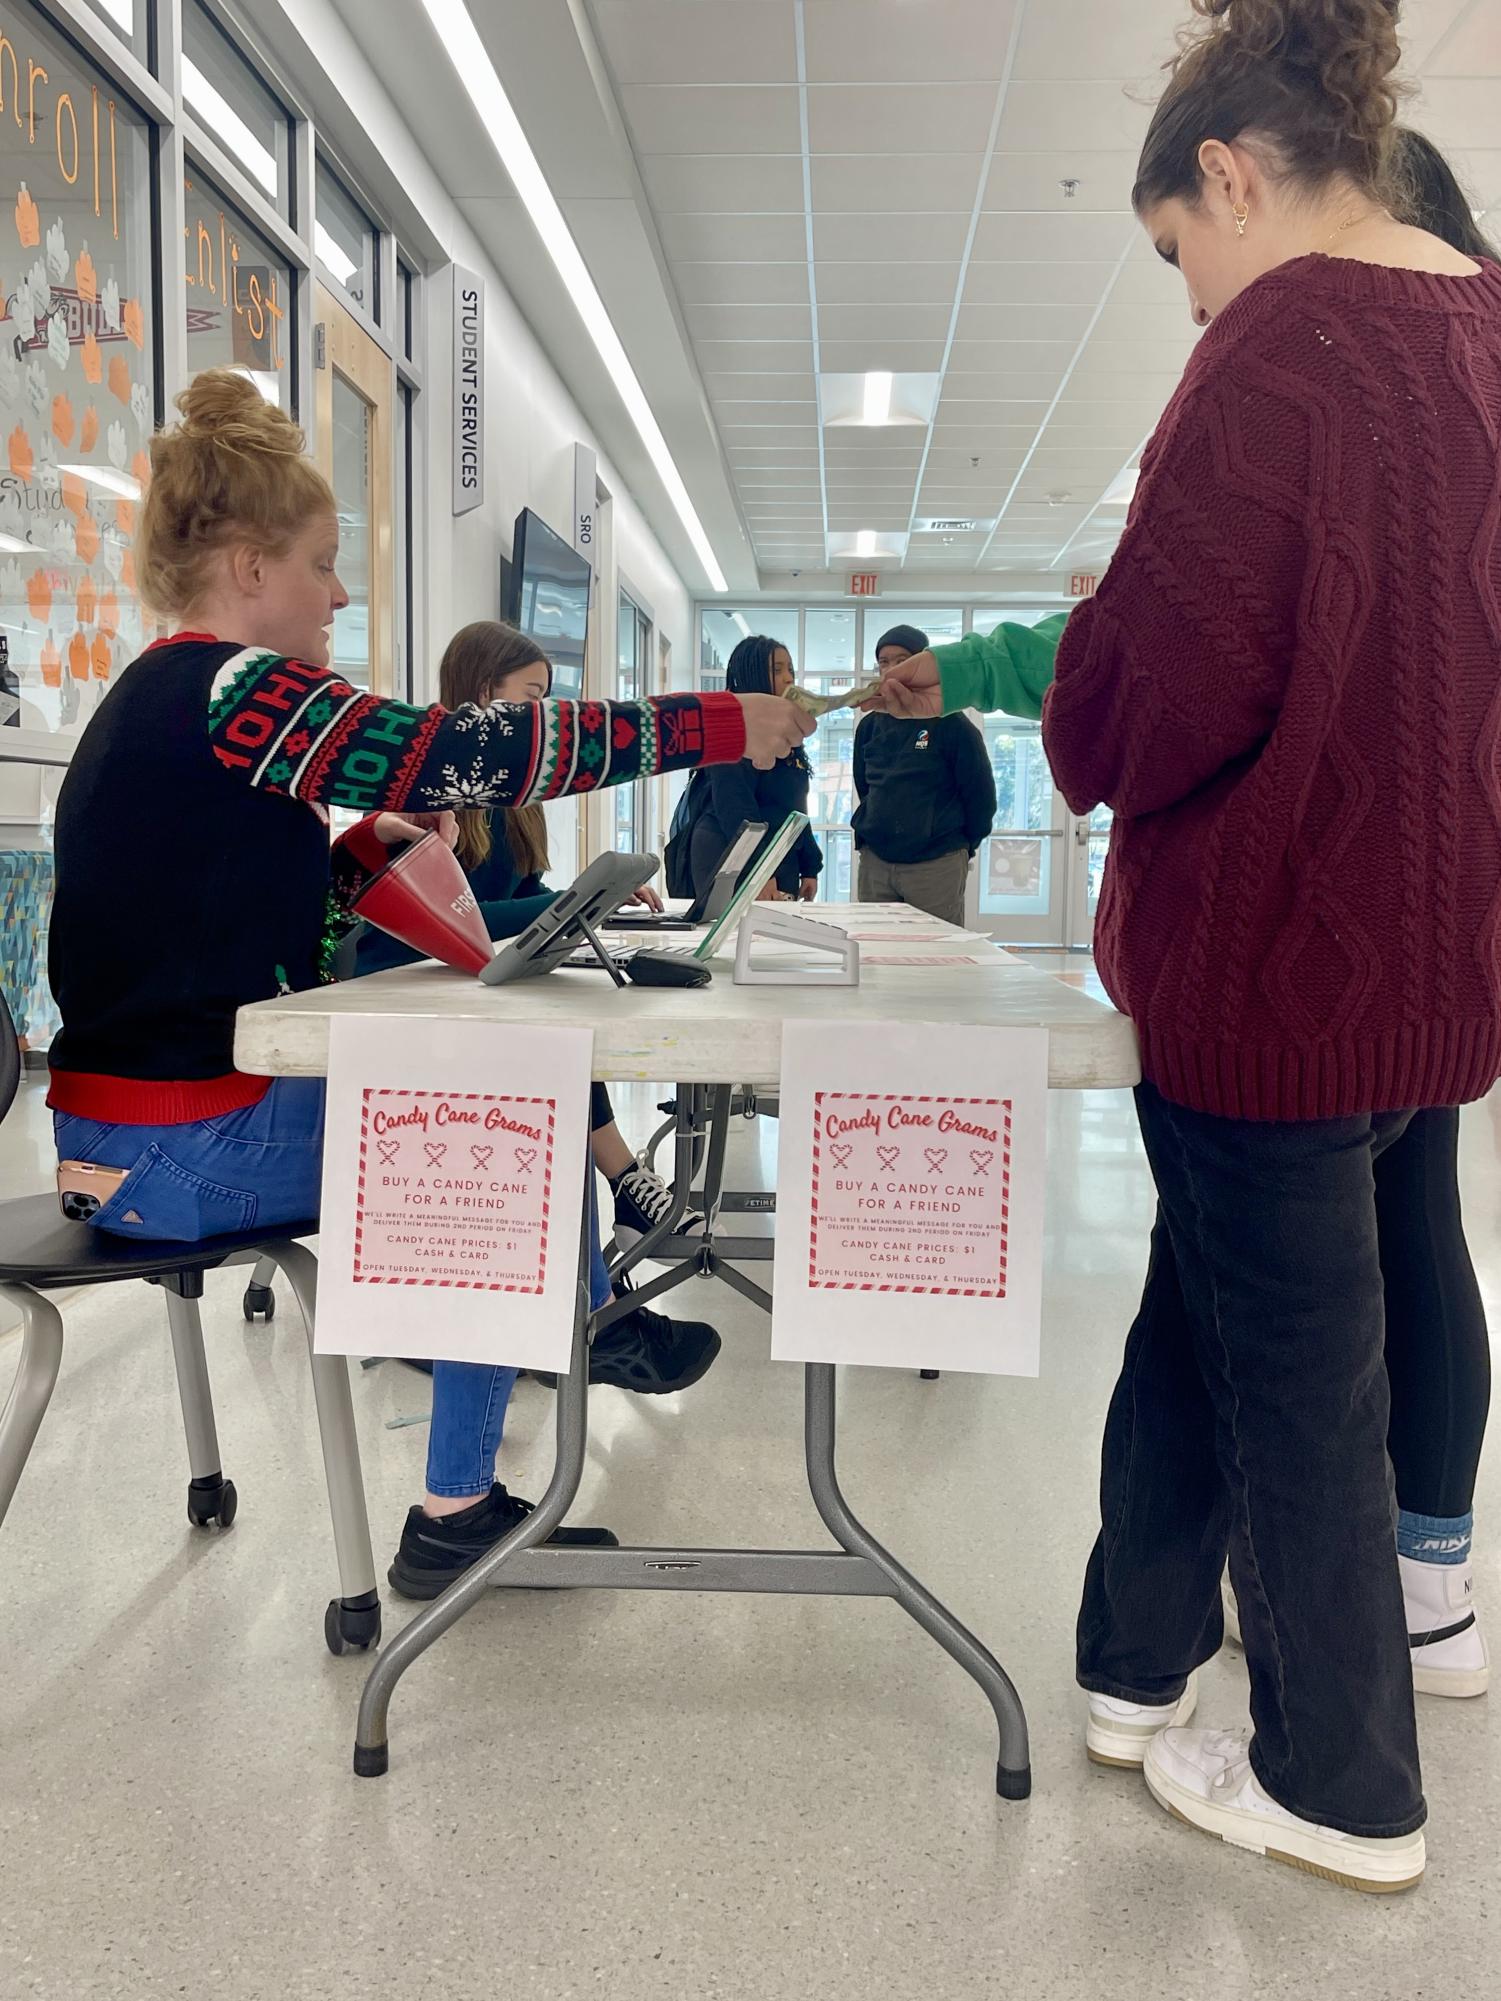 The student council has a table set up for both lunches, selling candy canes that will get passed on to their friends.